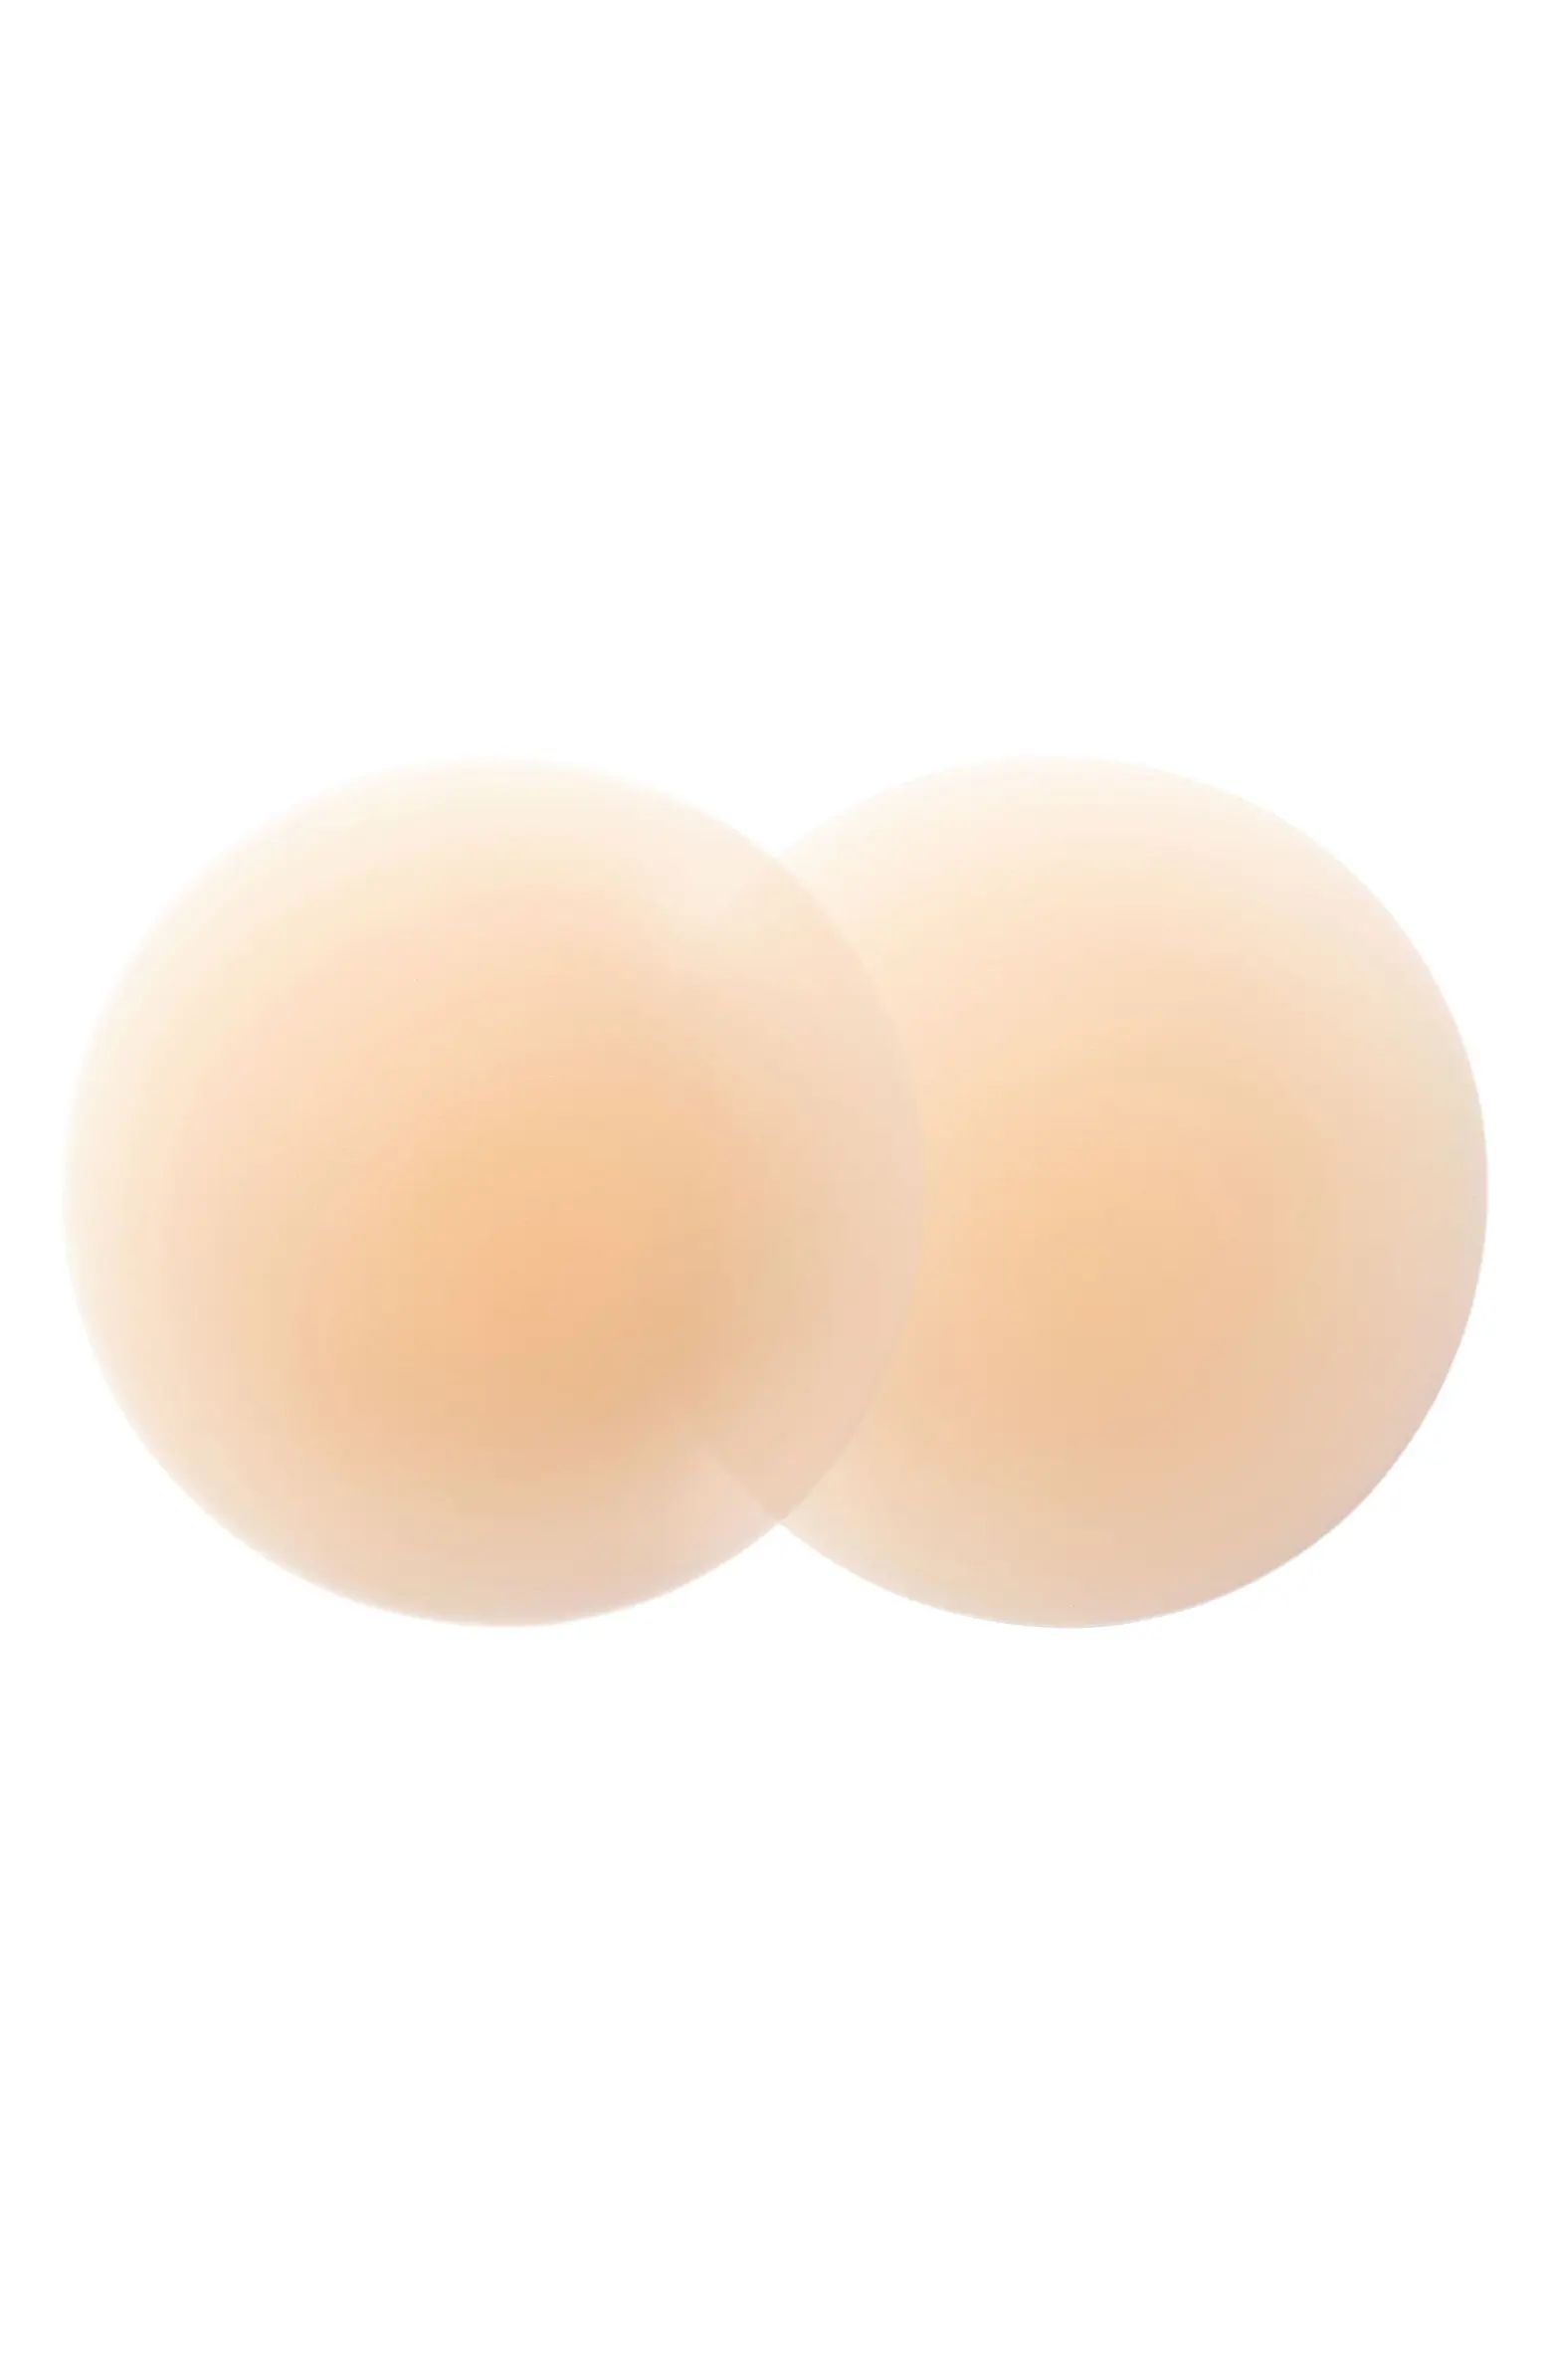 Bristols 6 Nippies by Bristols Six Skin Reusable Adhesive Nipple Covers | Nordstrom | Nordstrom